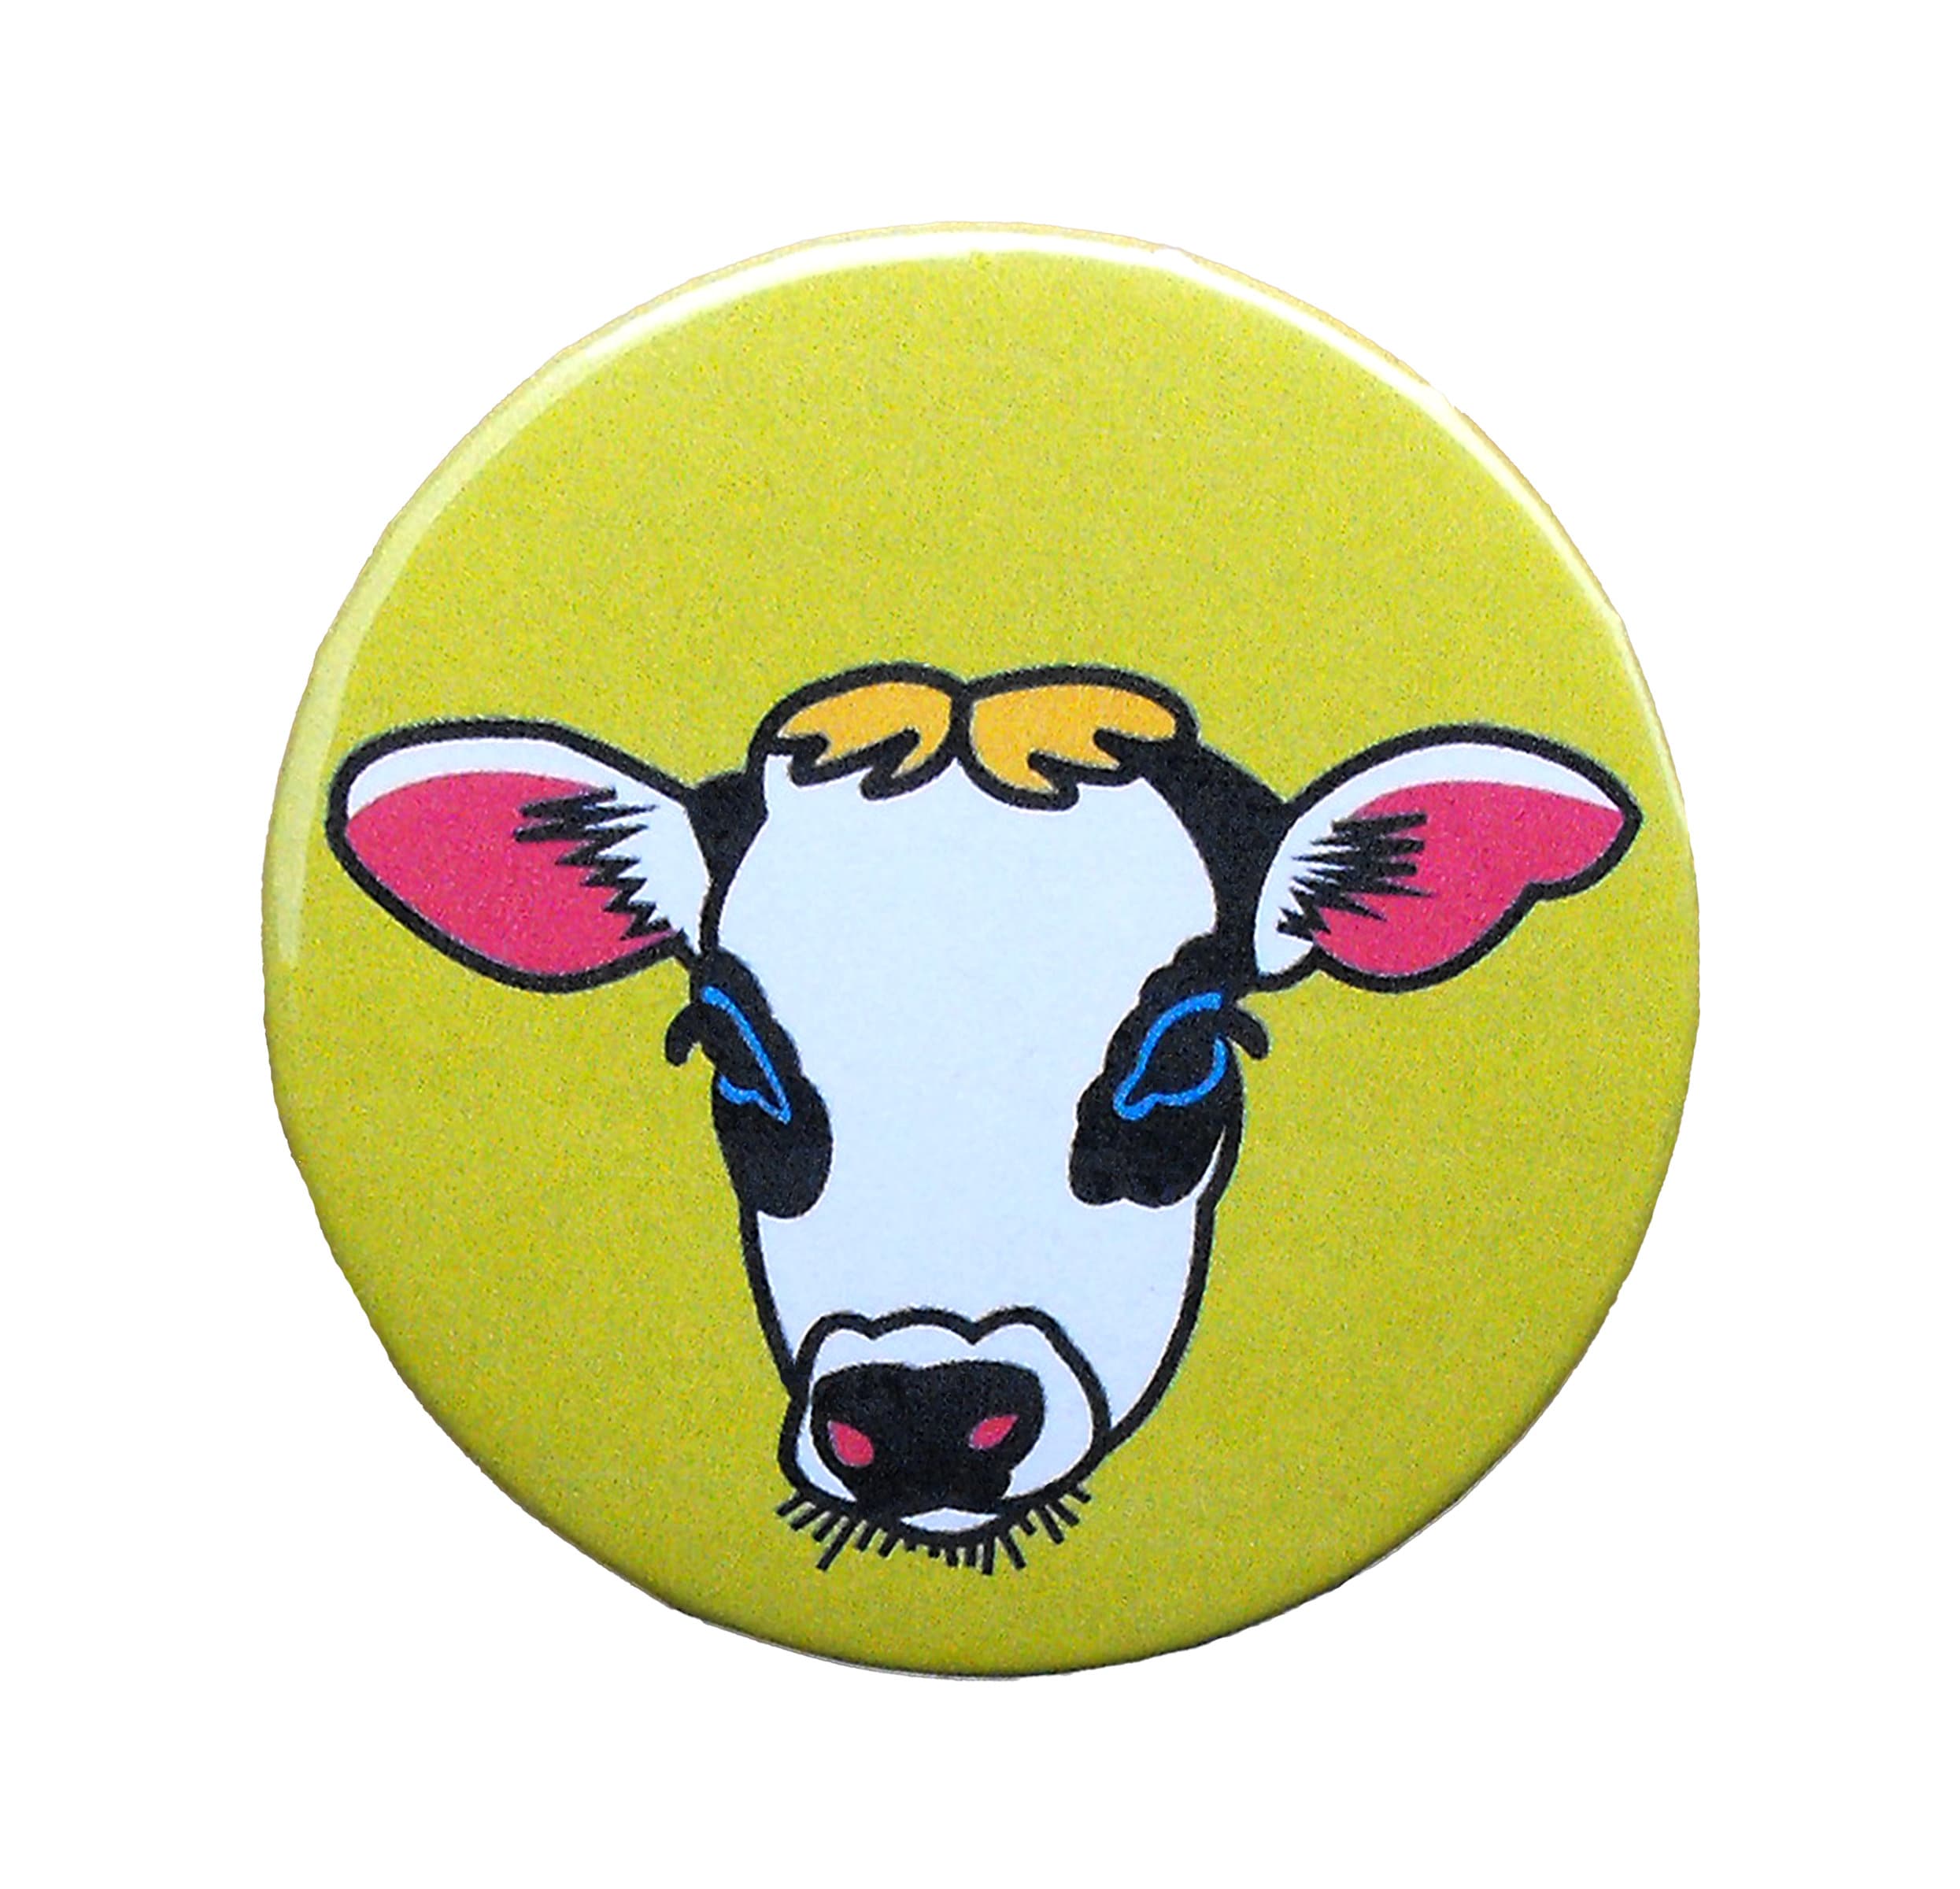 Cow Button Pin Badge  Pop Art Farm Animal Pins  Dairy Cows 2.25 Lapel Pin Back for Bags Accessories Pinback Buttons  Cool Gifts Under 5